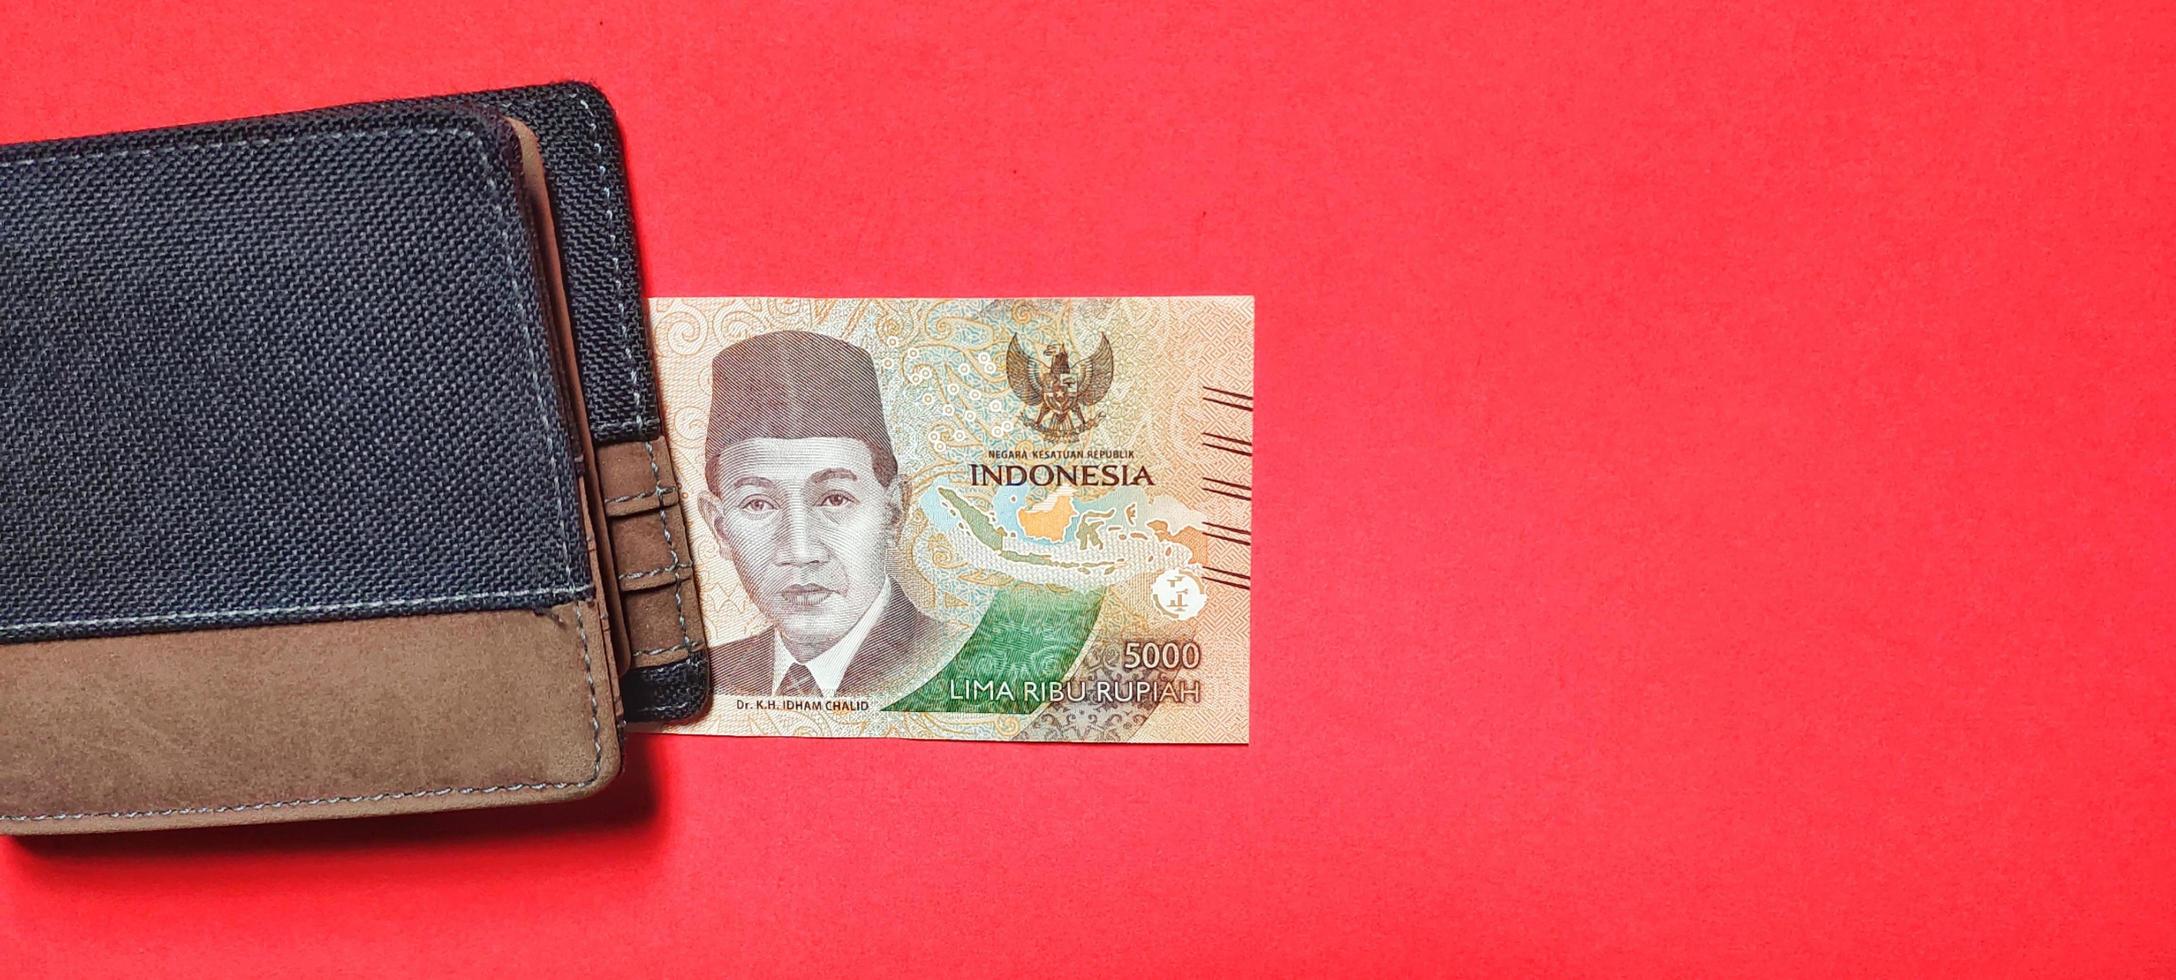 The latest edition of Indonesian rupiah banknotes worth 5,000 rupiah and a brown wallet. photo